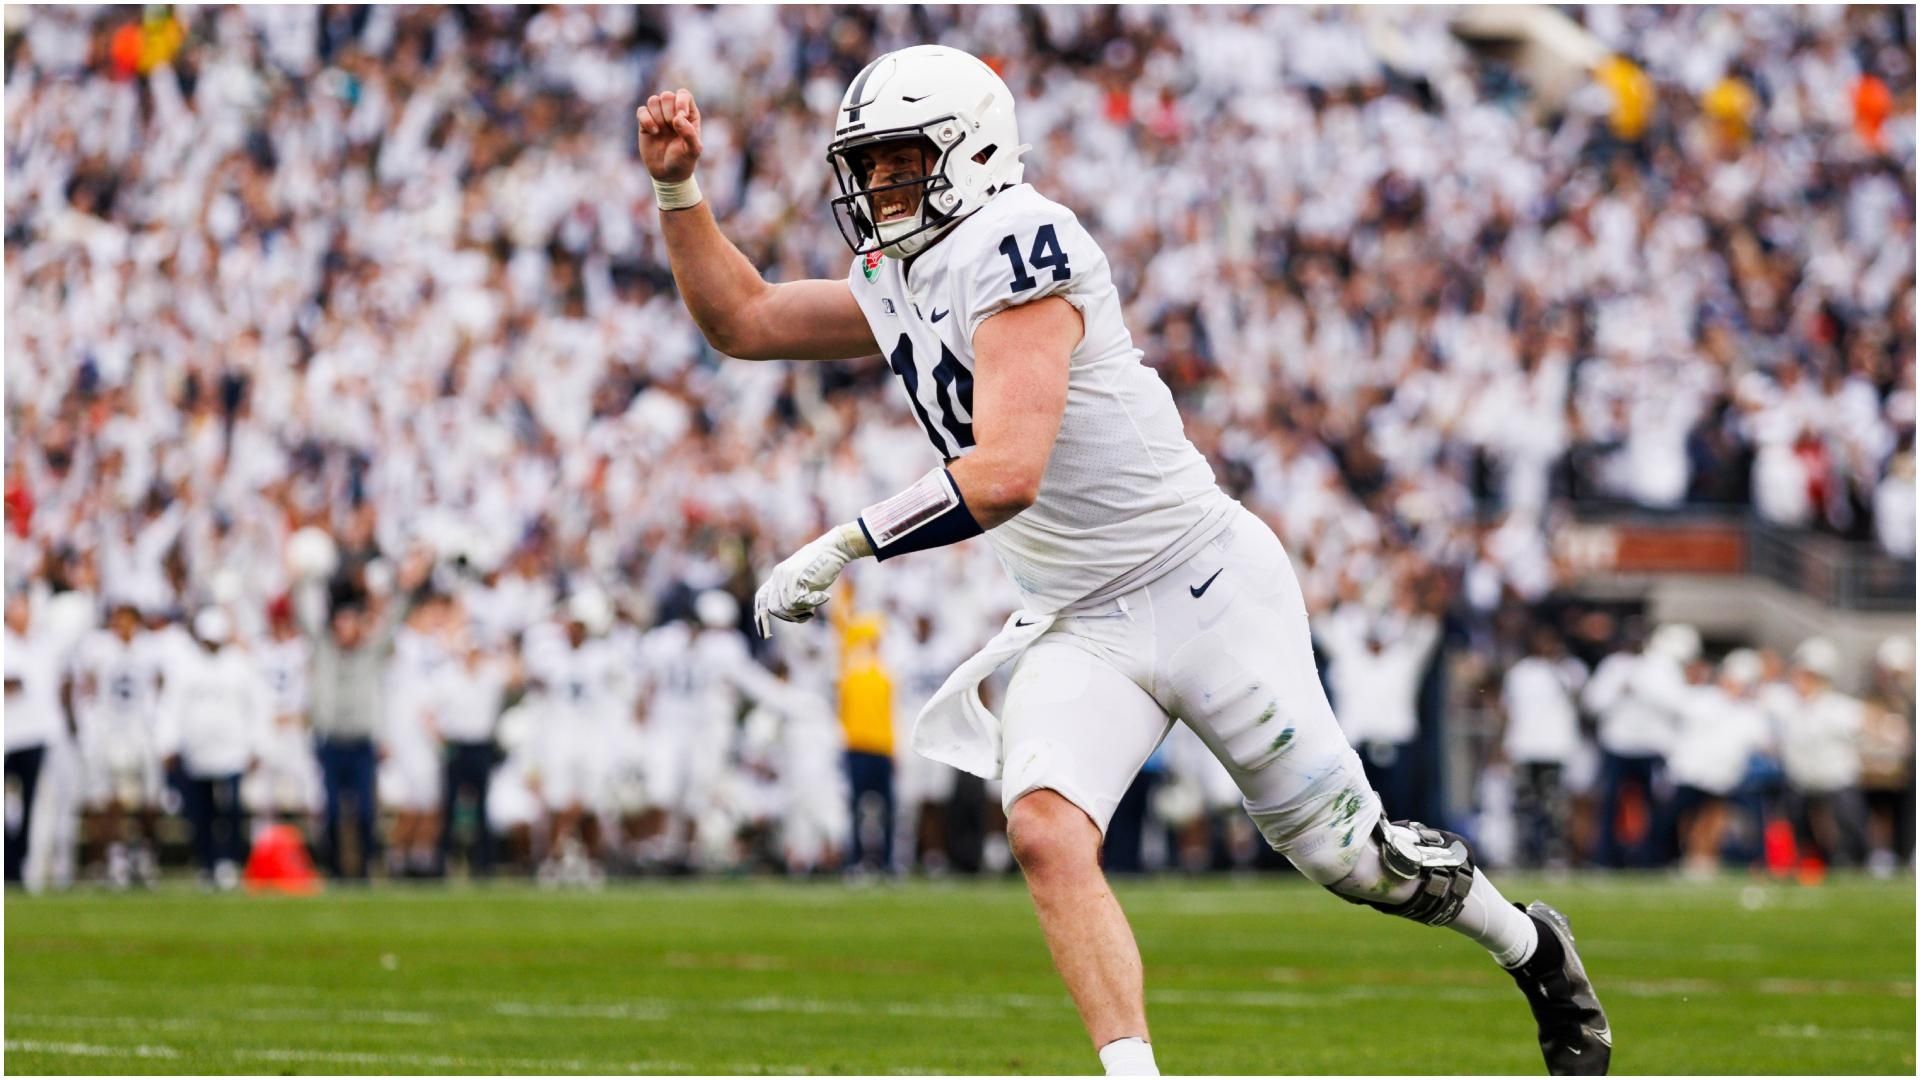 Penn State pulls away in 2nd half for Rose Bowl win ESPN Video